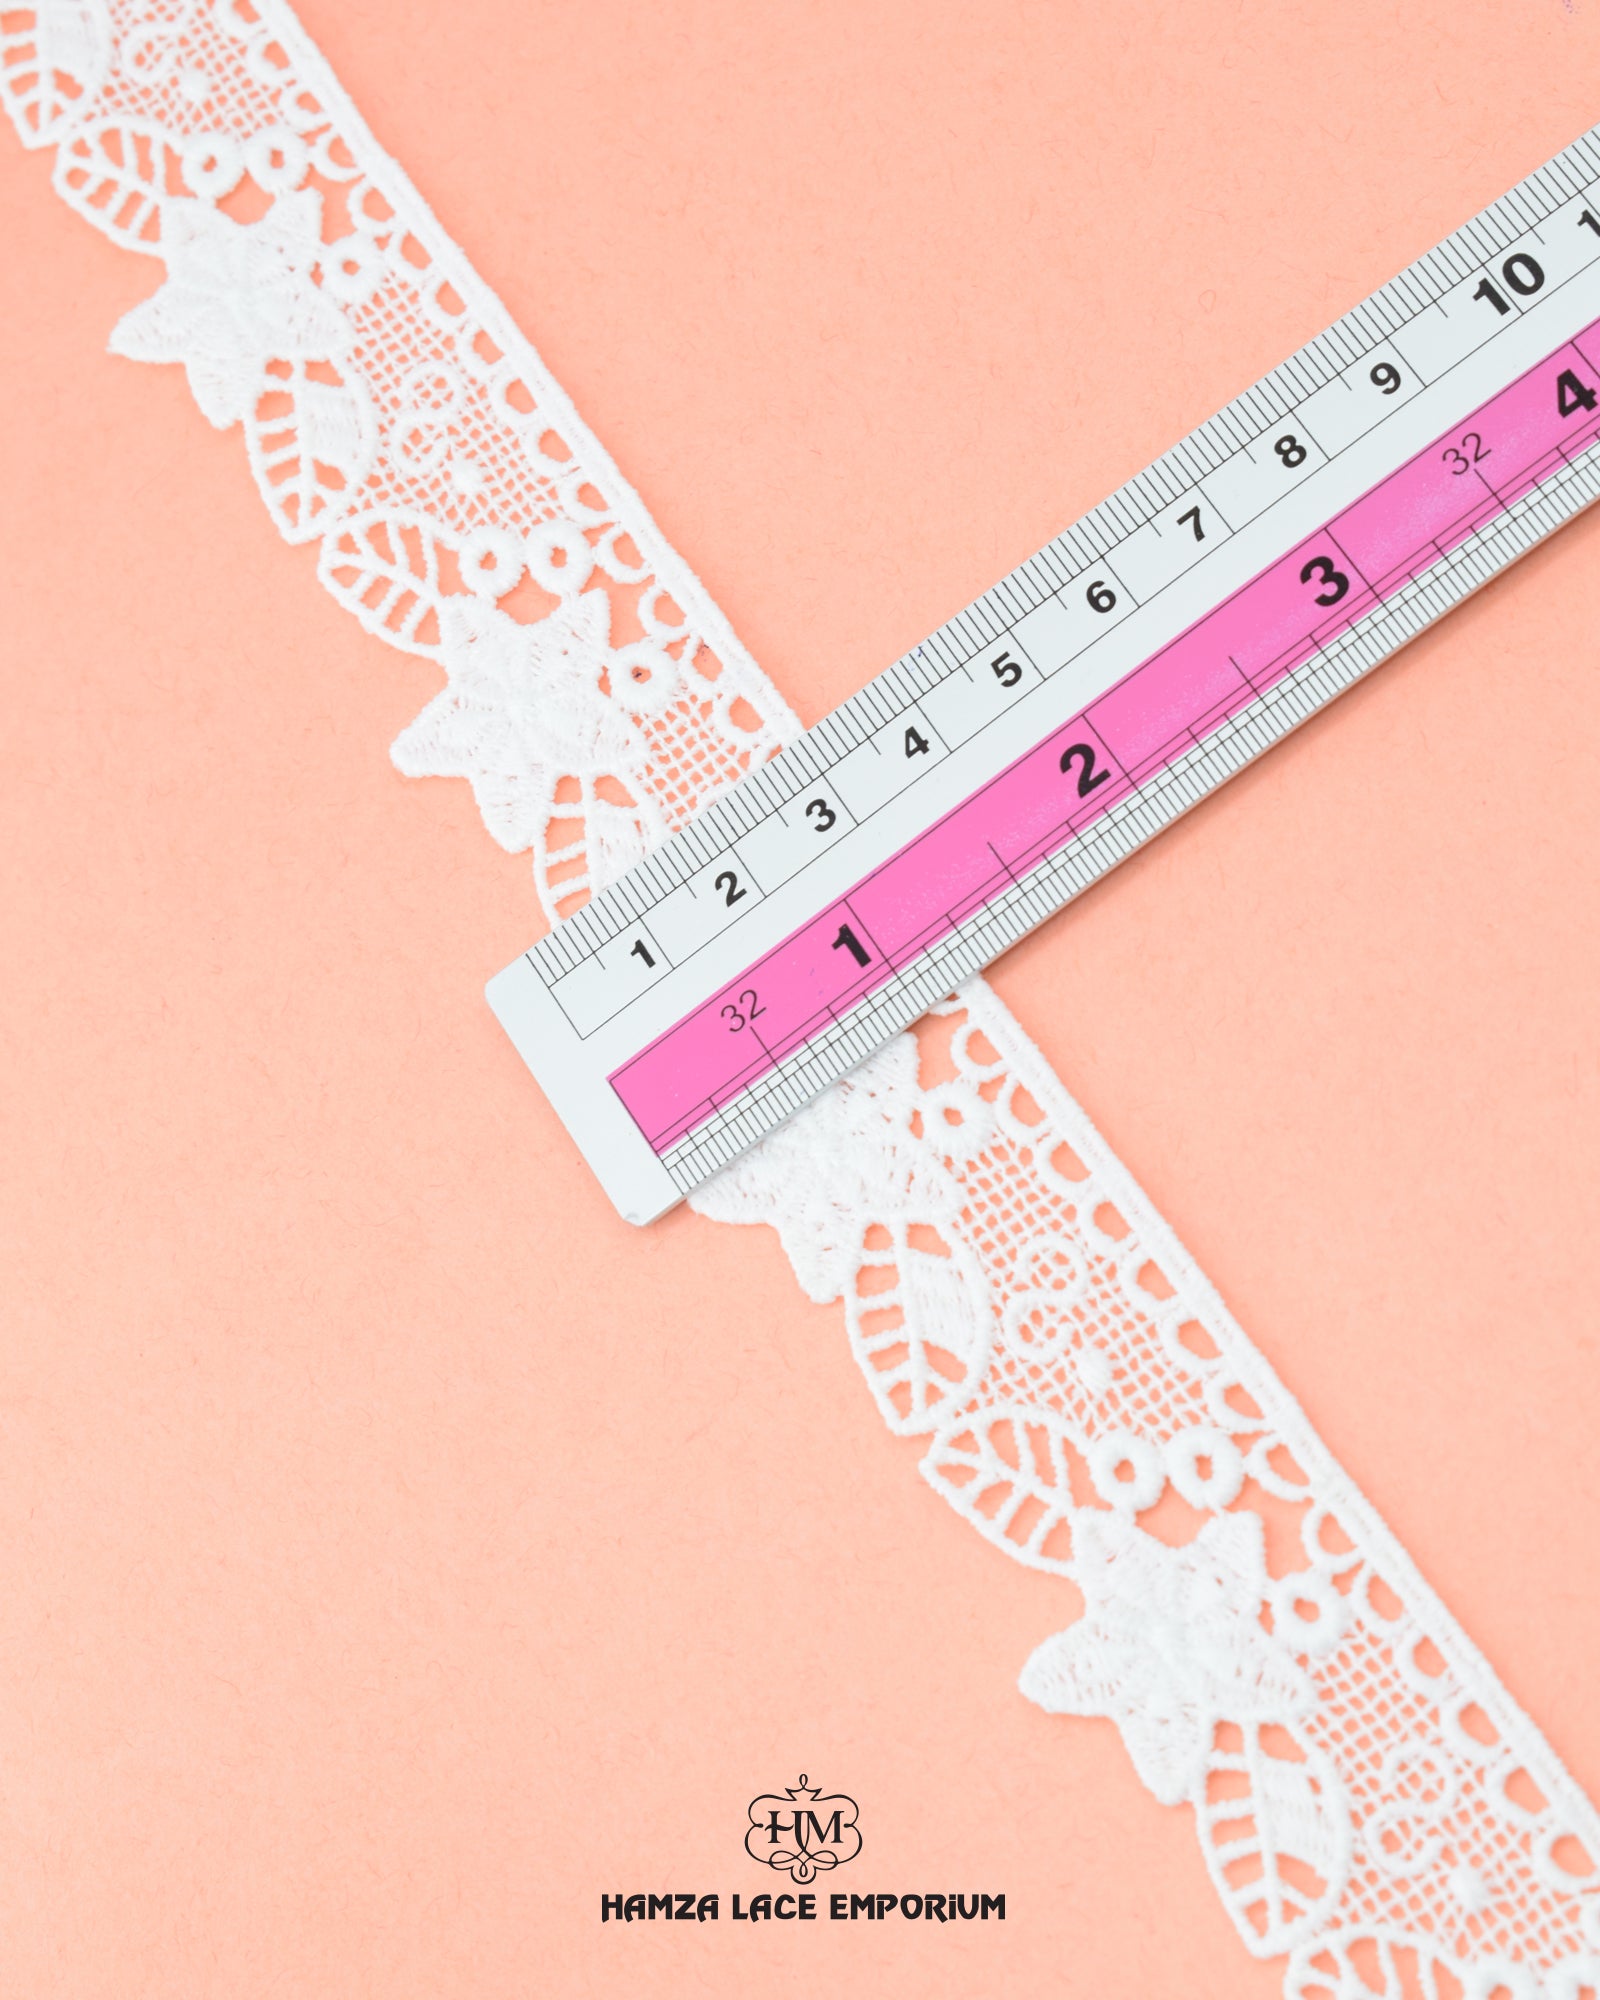 Size of the 'Edging Lace 5509' is shown as '1.25' inches with the help of a ruler